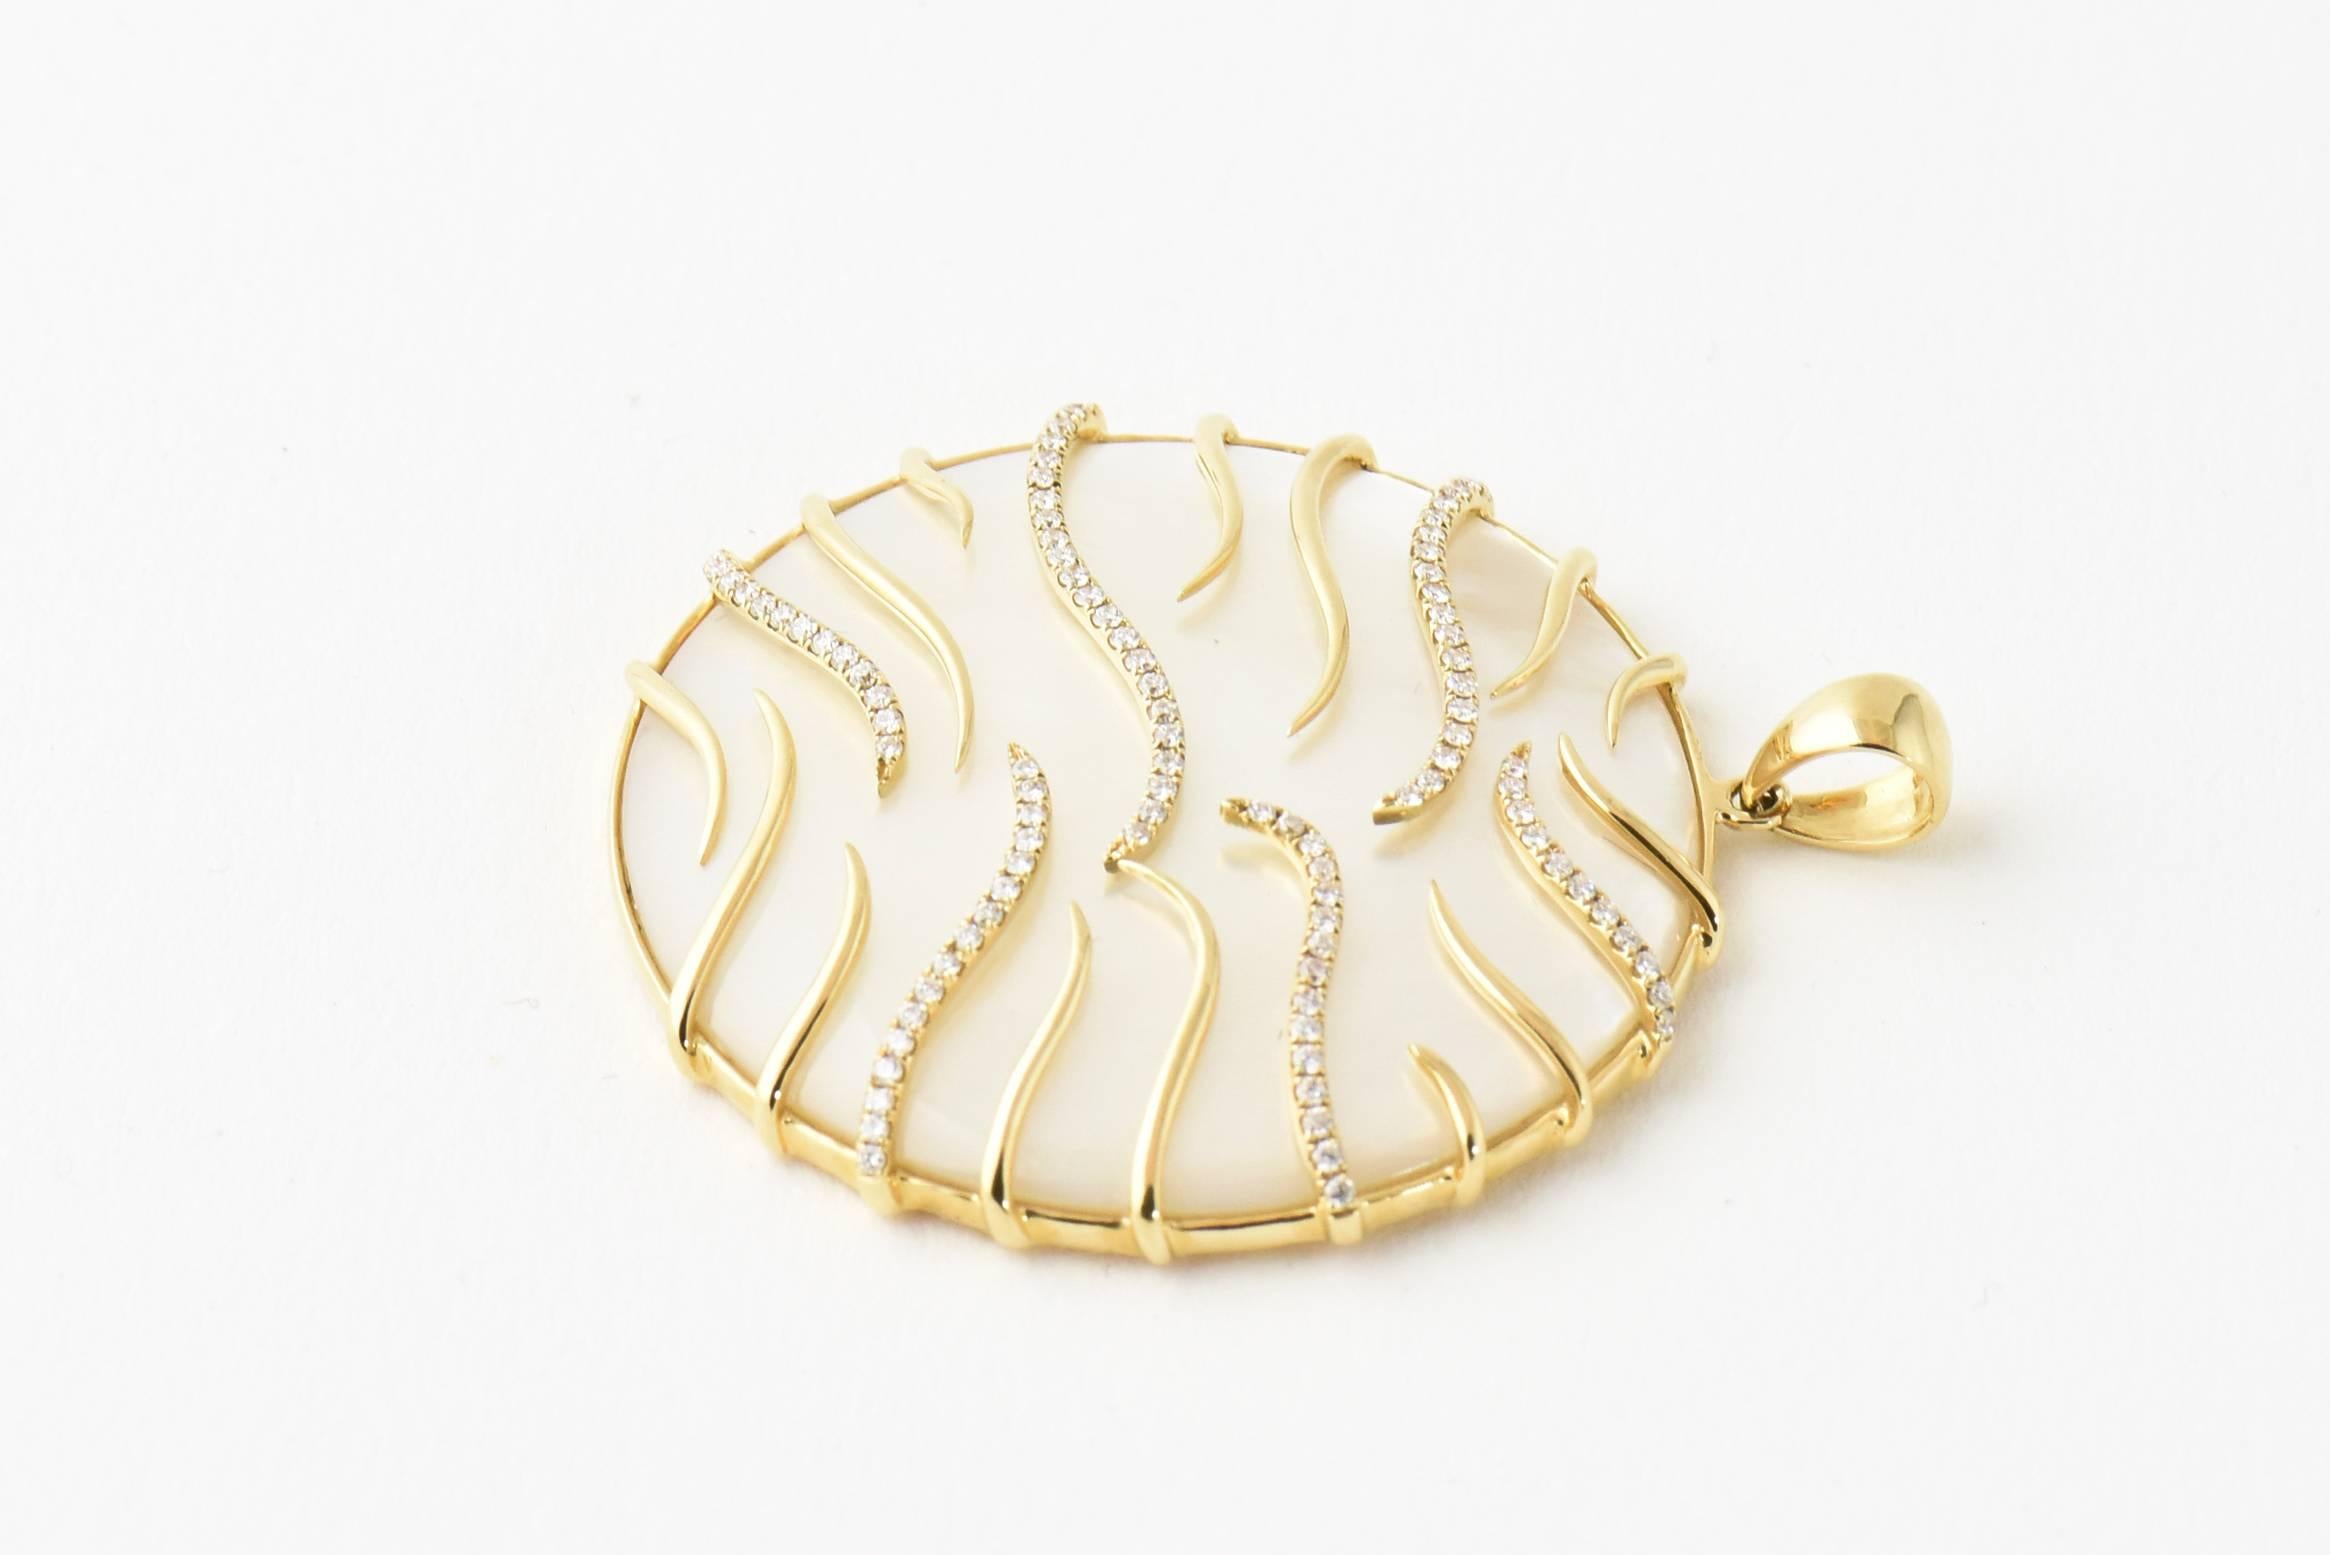 Frederic Sage pendant 18-karat yellow gold settings that emulates a glowing full moon, round mother-of-pearl pendant is encased in gold stripe settings, 41mm (1 3/4